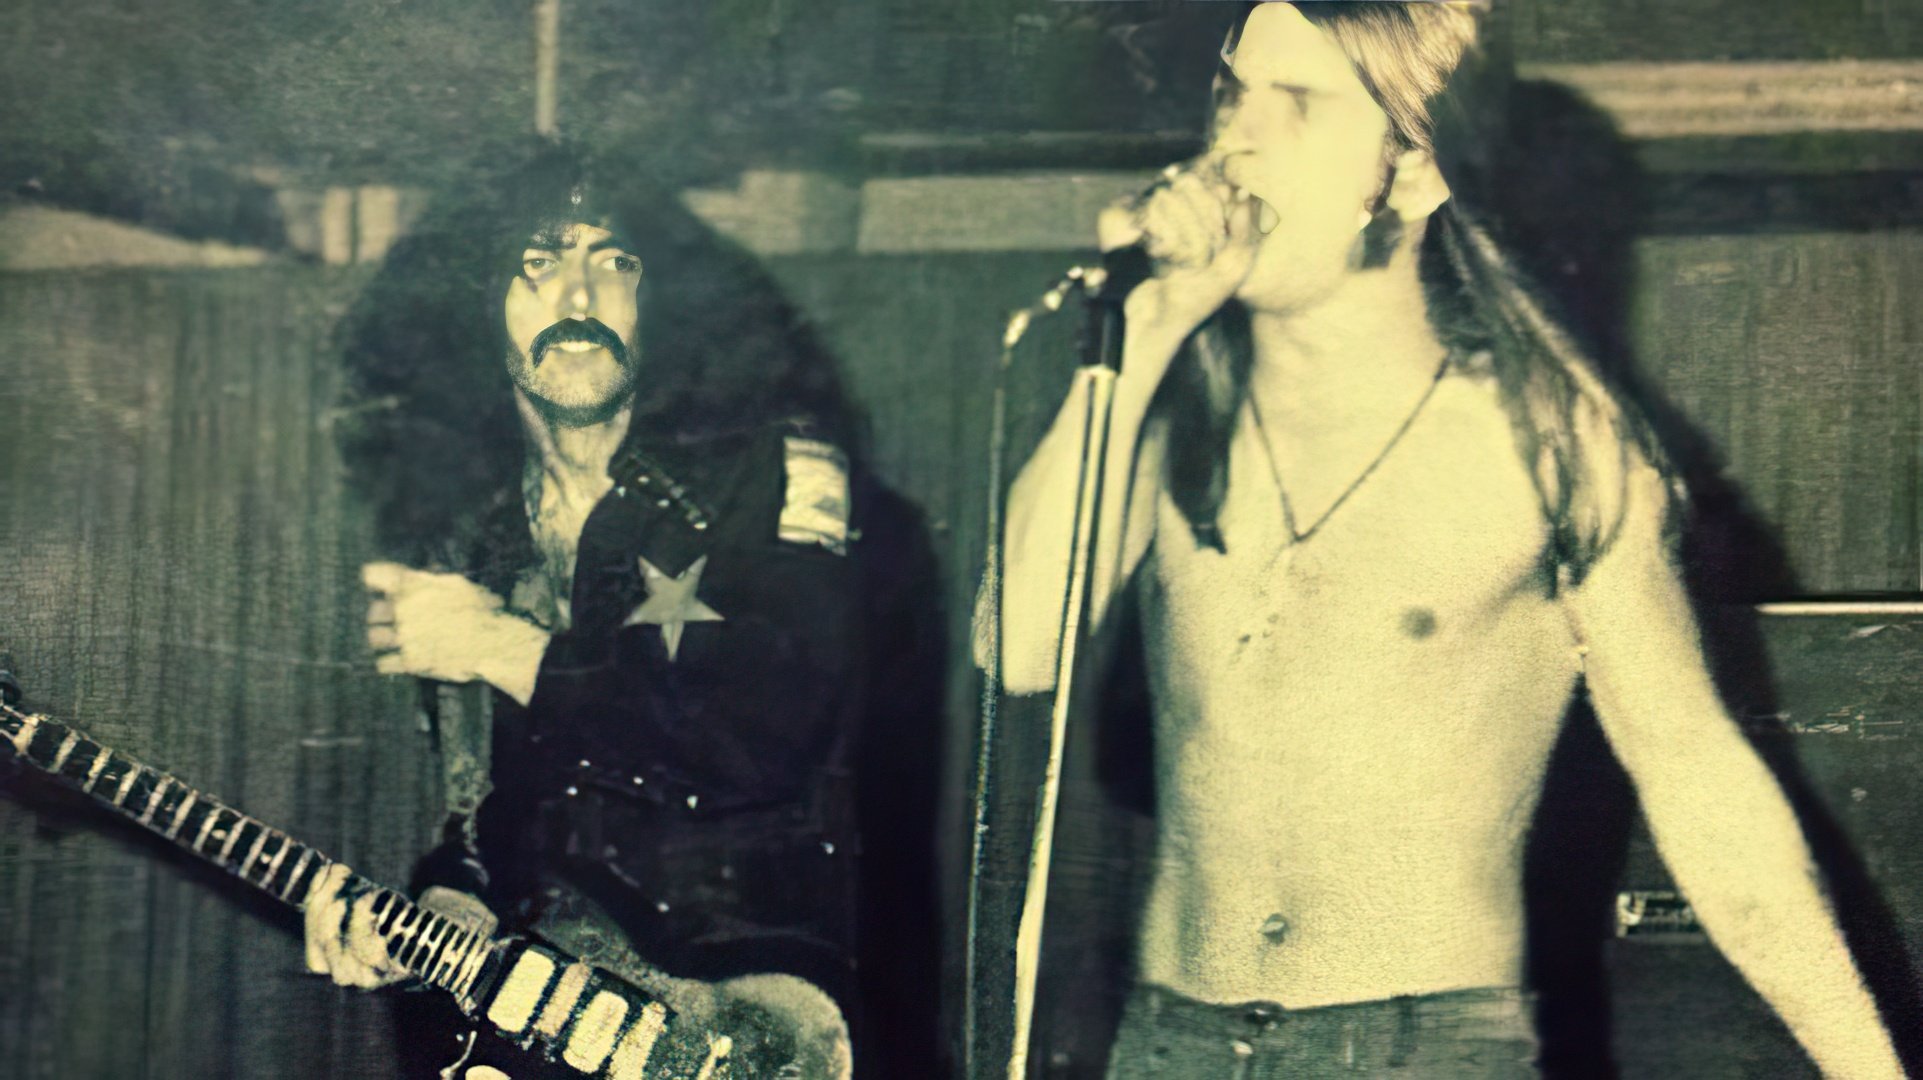 One of the first performances of Black Sabbath